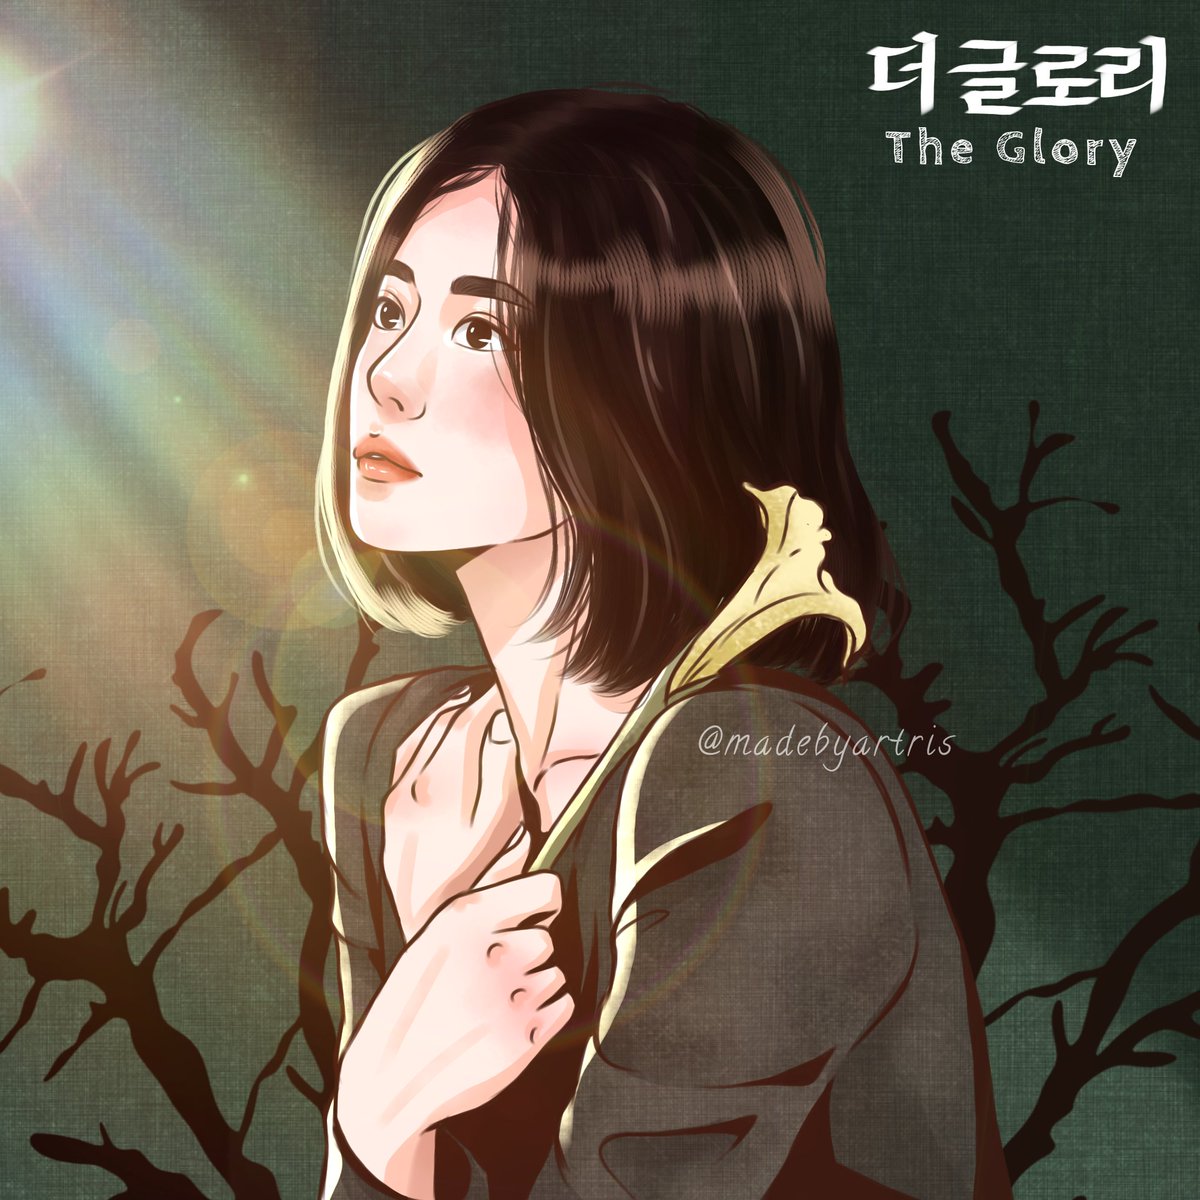 “Because they’re staying warm, they don’t realize how cold it is outside. Life is just calm and happy for them.” 
– Moon Dong Eun [The Glory]

#SongHyeKyo #LeeDoHyun #TheGlory #TheGlory2 #kdrama #art #fanart